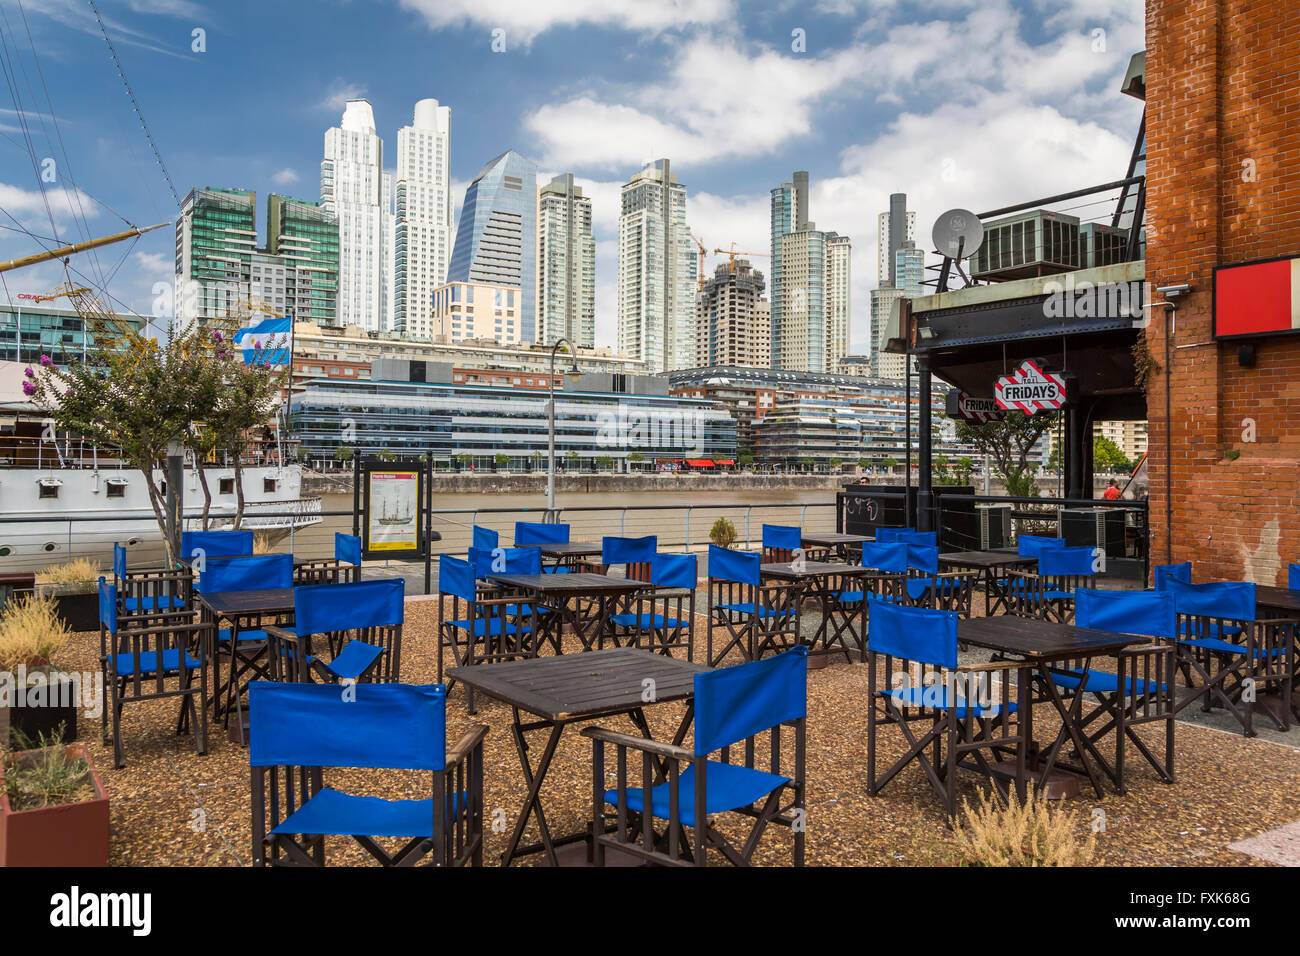 The TGI Fridays restaurant in the waterfront district of Puerto Madero, Buenos Aires, Argentina, South America. Stock Photo